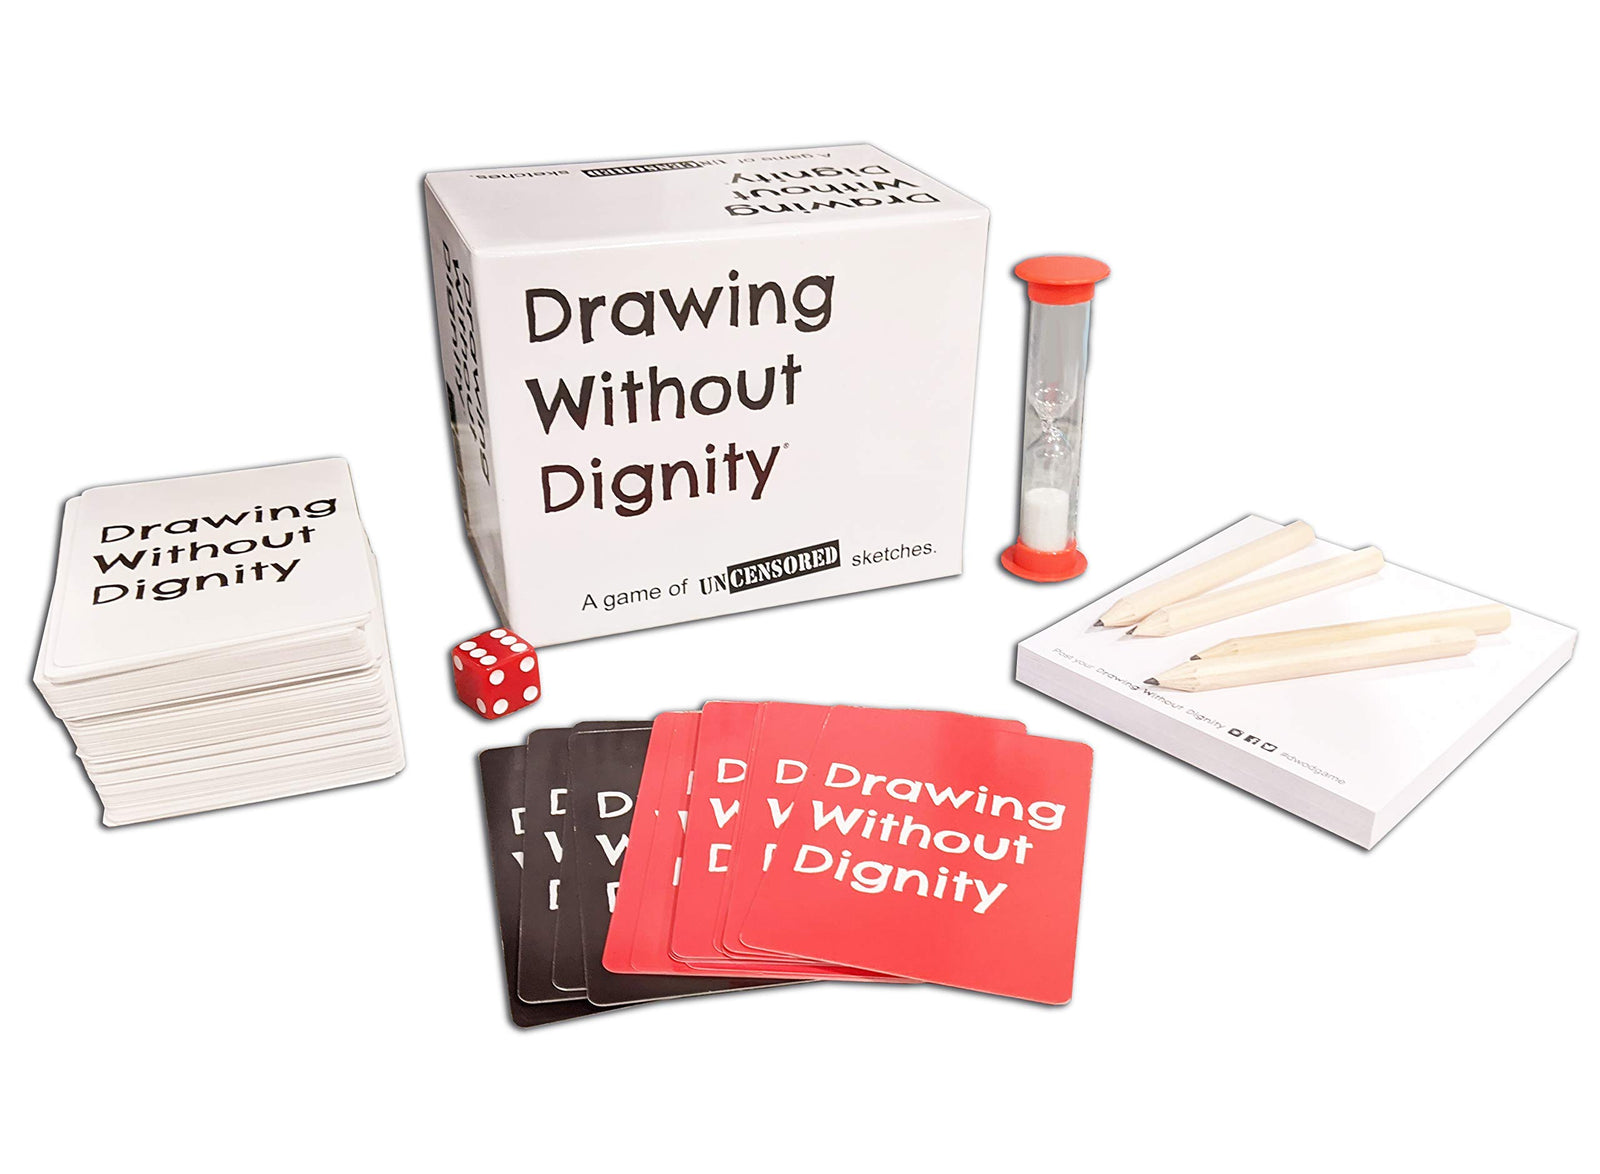 Drawing Without Dignity - Hilarious Adult Party Game - It's Like Cards Against Humanity Meets Pictionary!